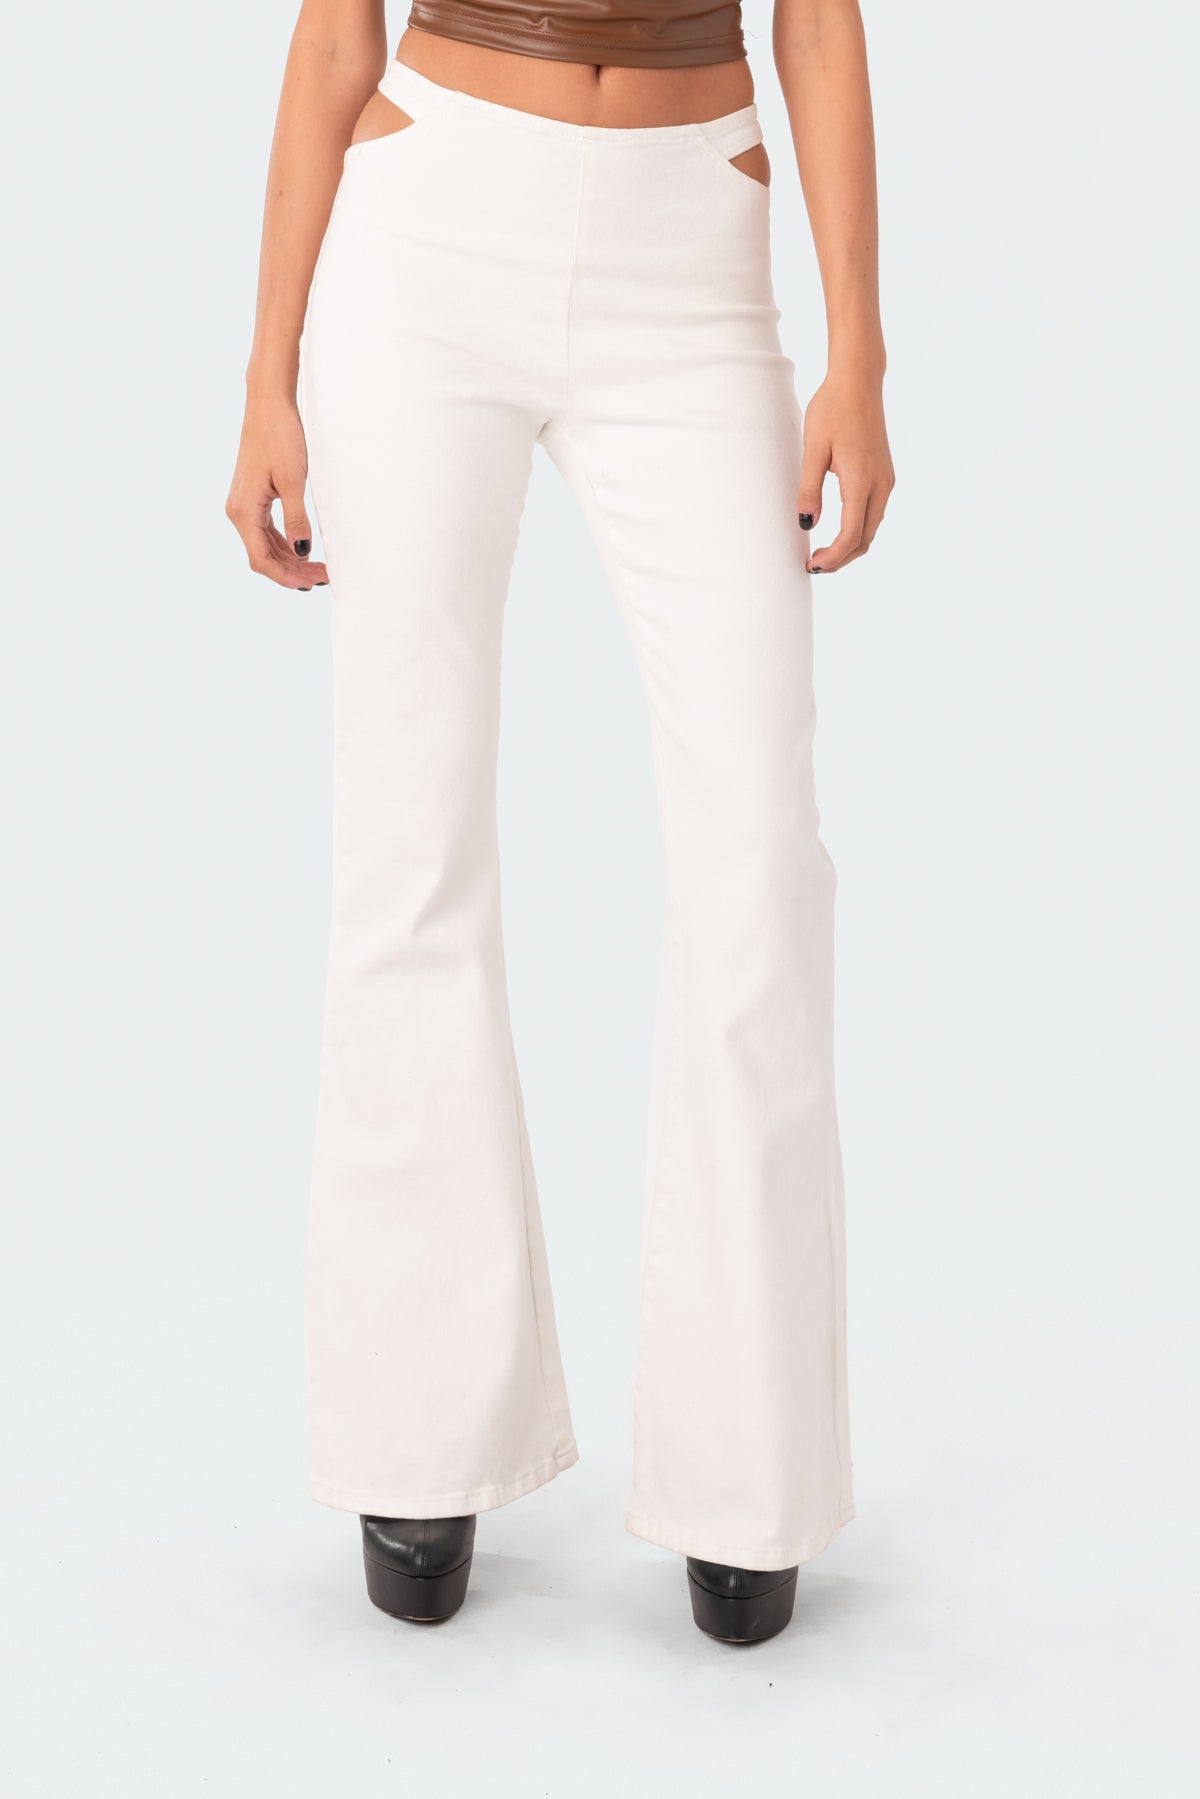 Kira Cut-Out Flared Jeans